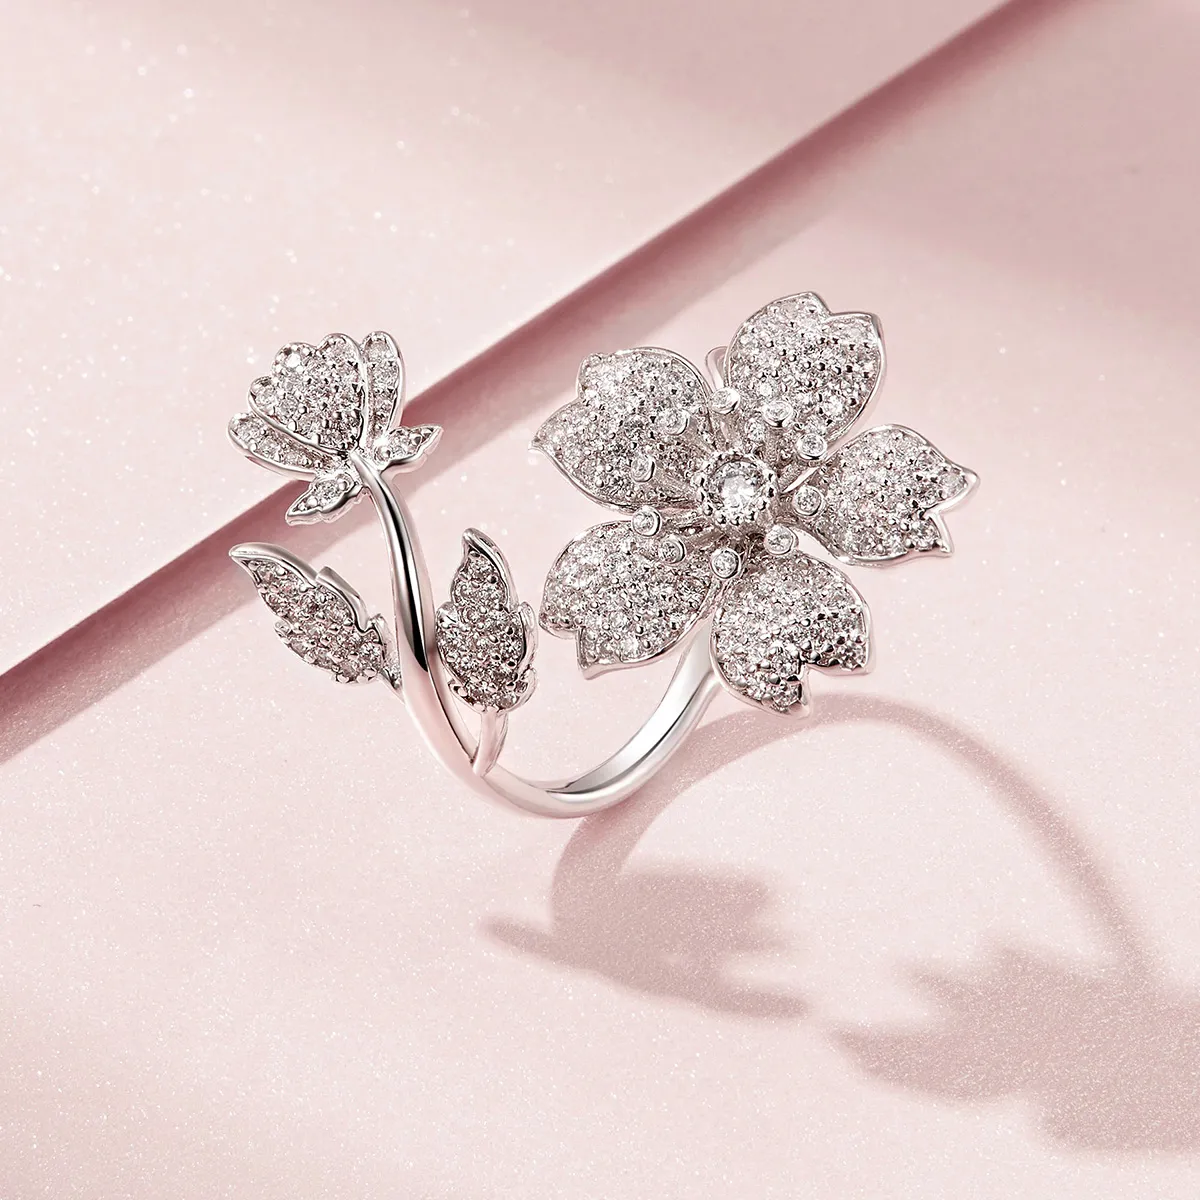 Pandora Style Cherry Blossoms Open Ring - BSR076